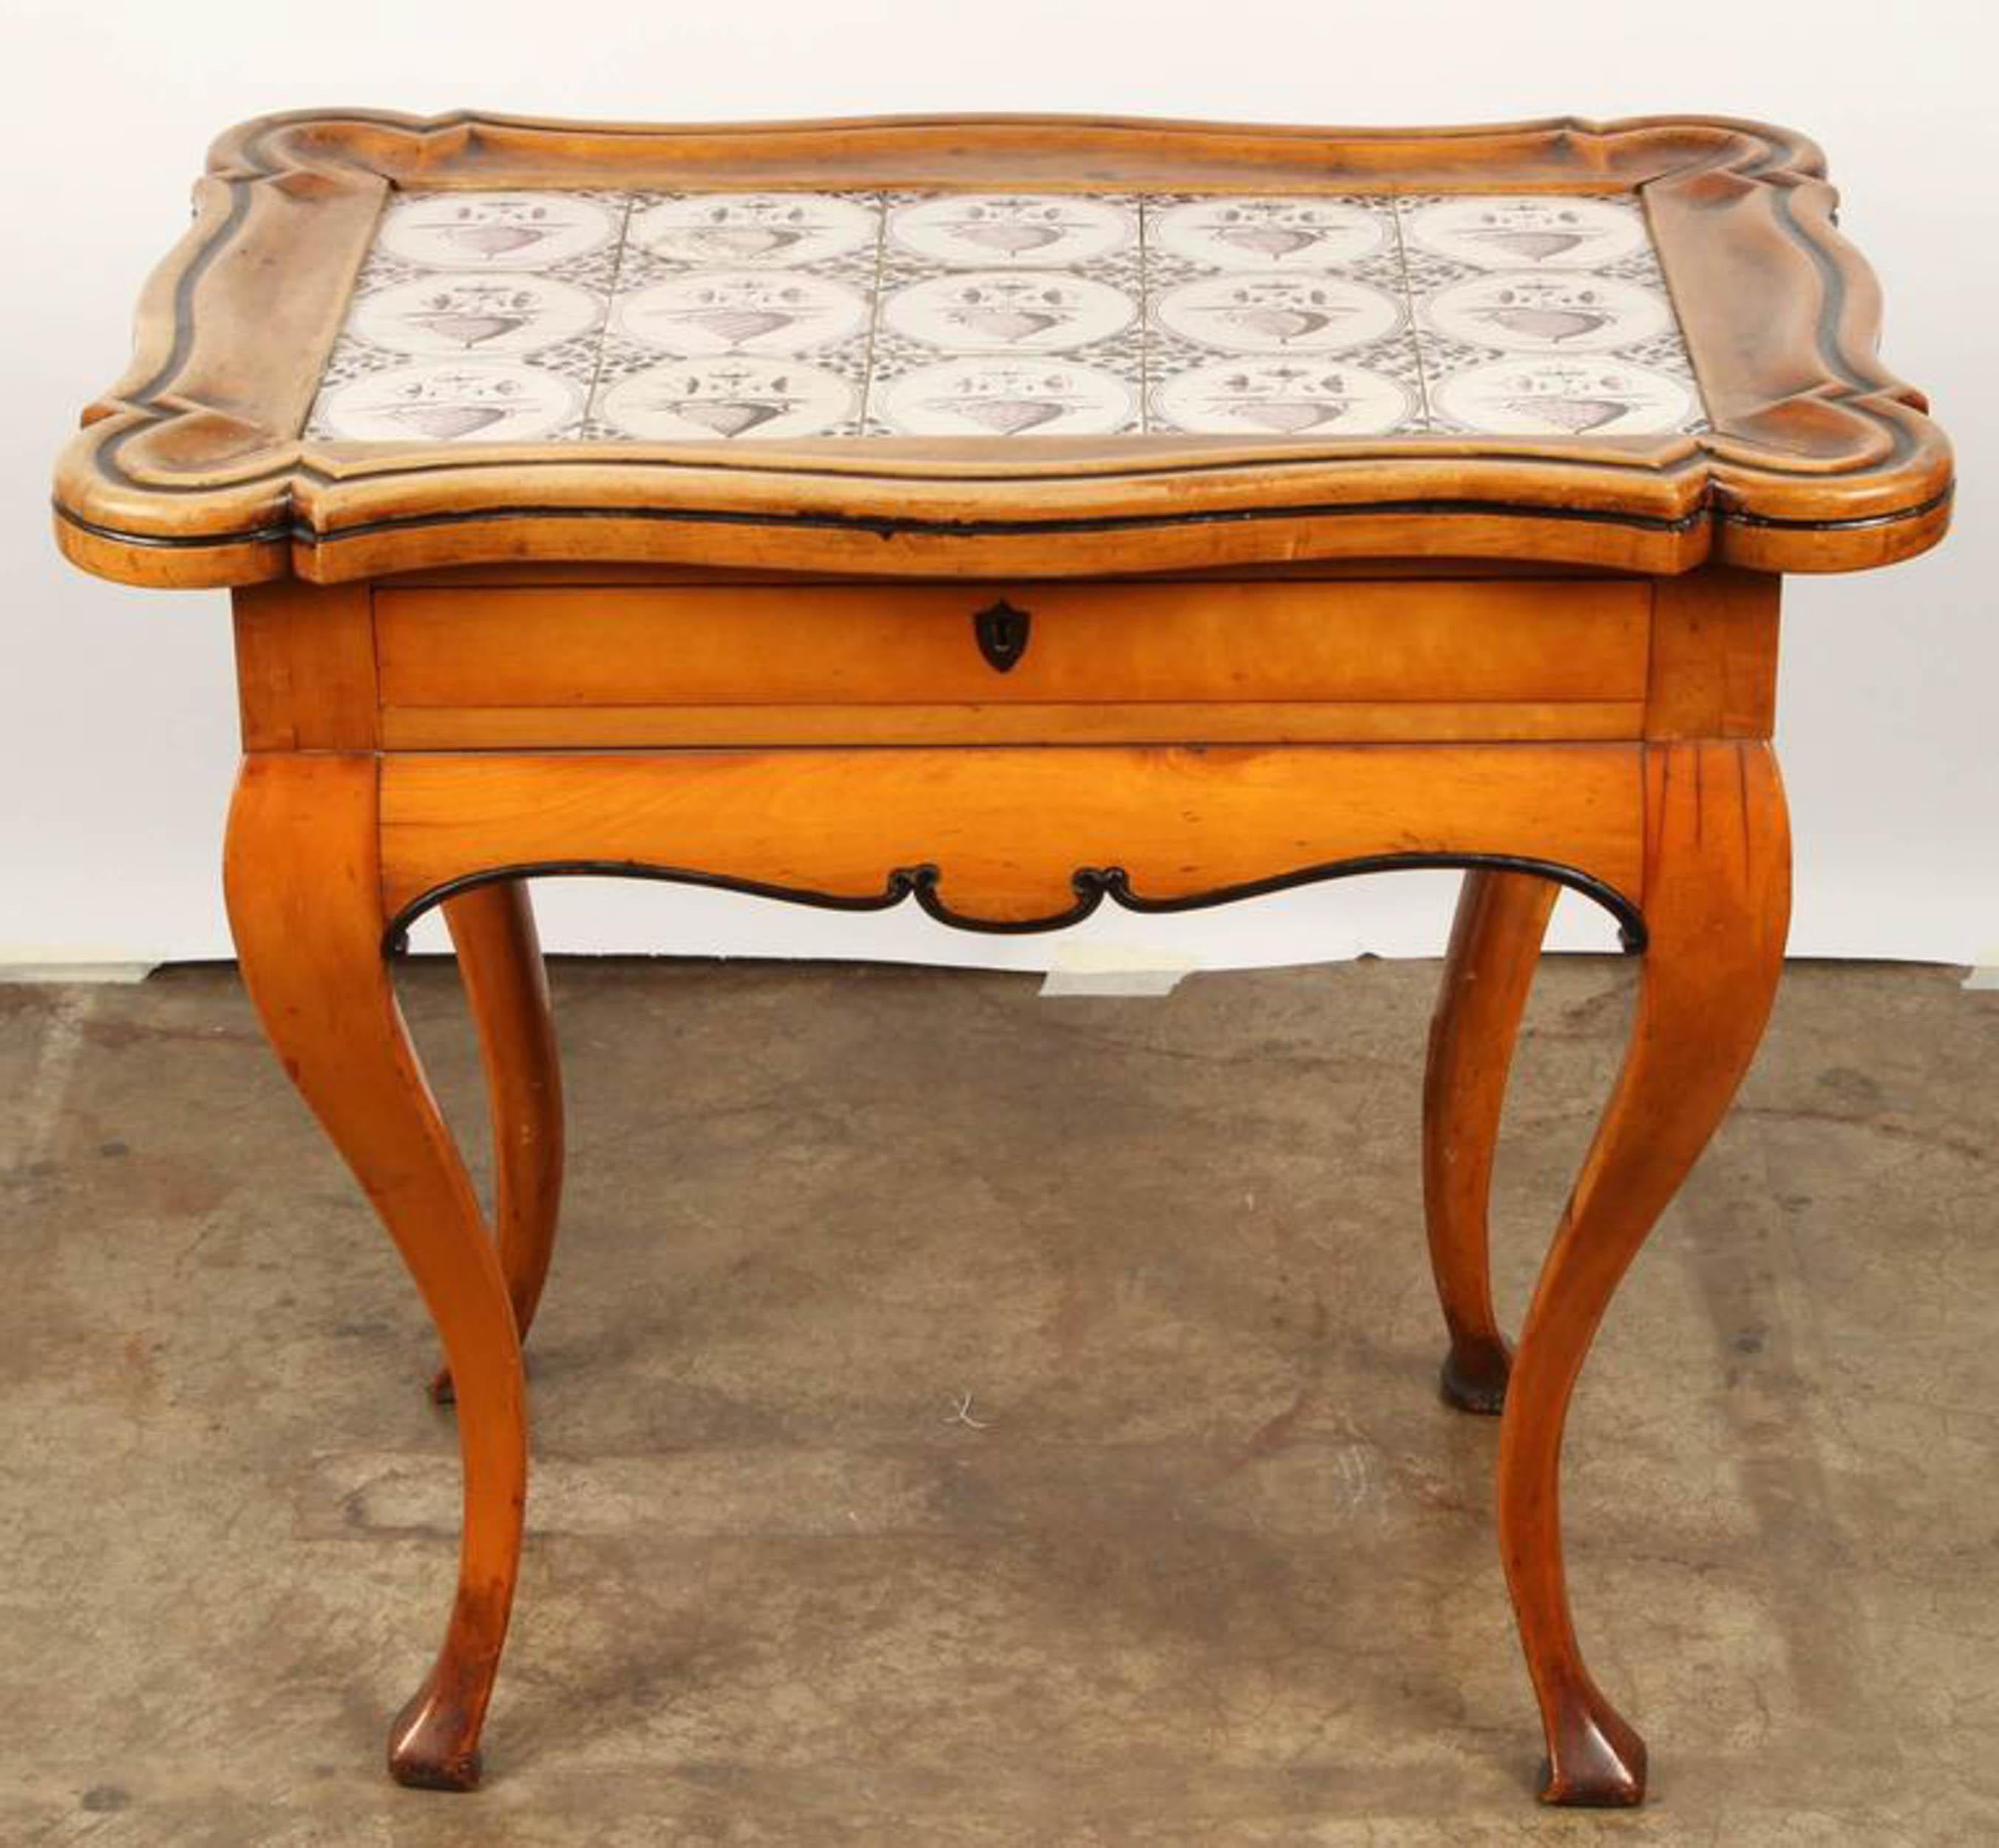 Northern German Rococo style fruitwood table with 